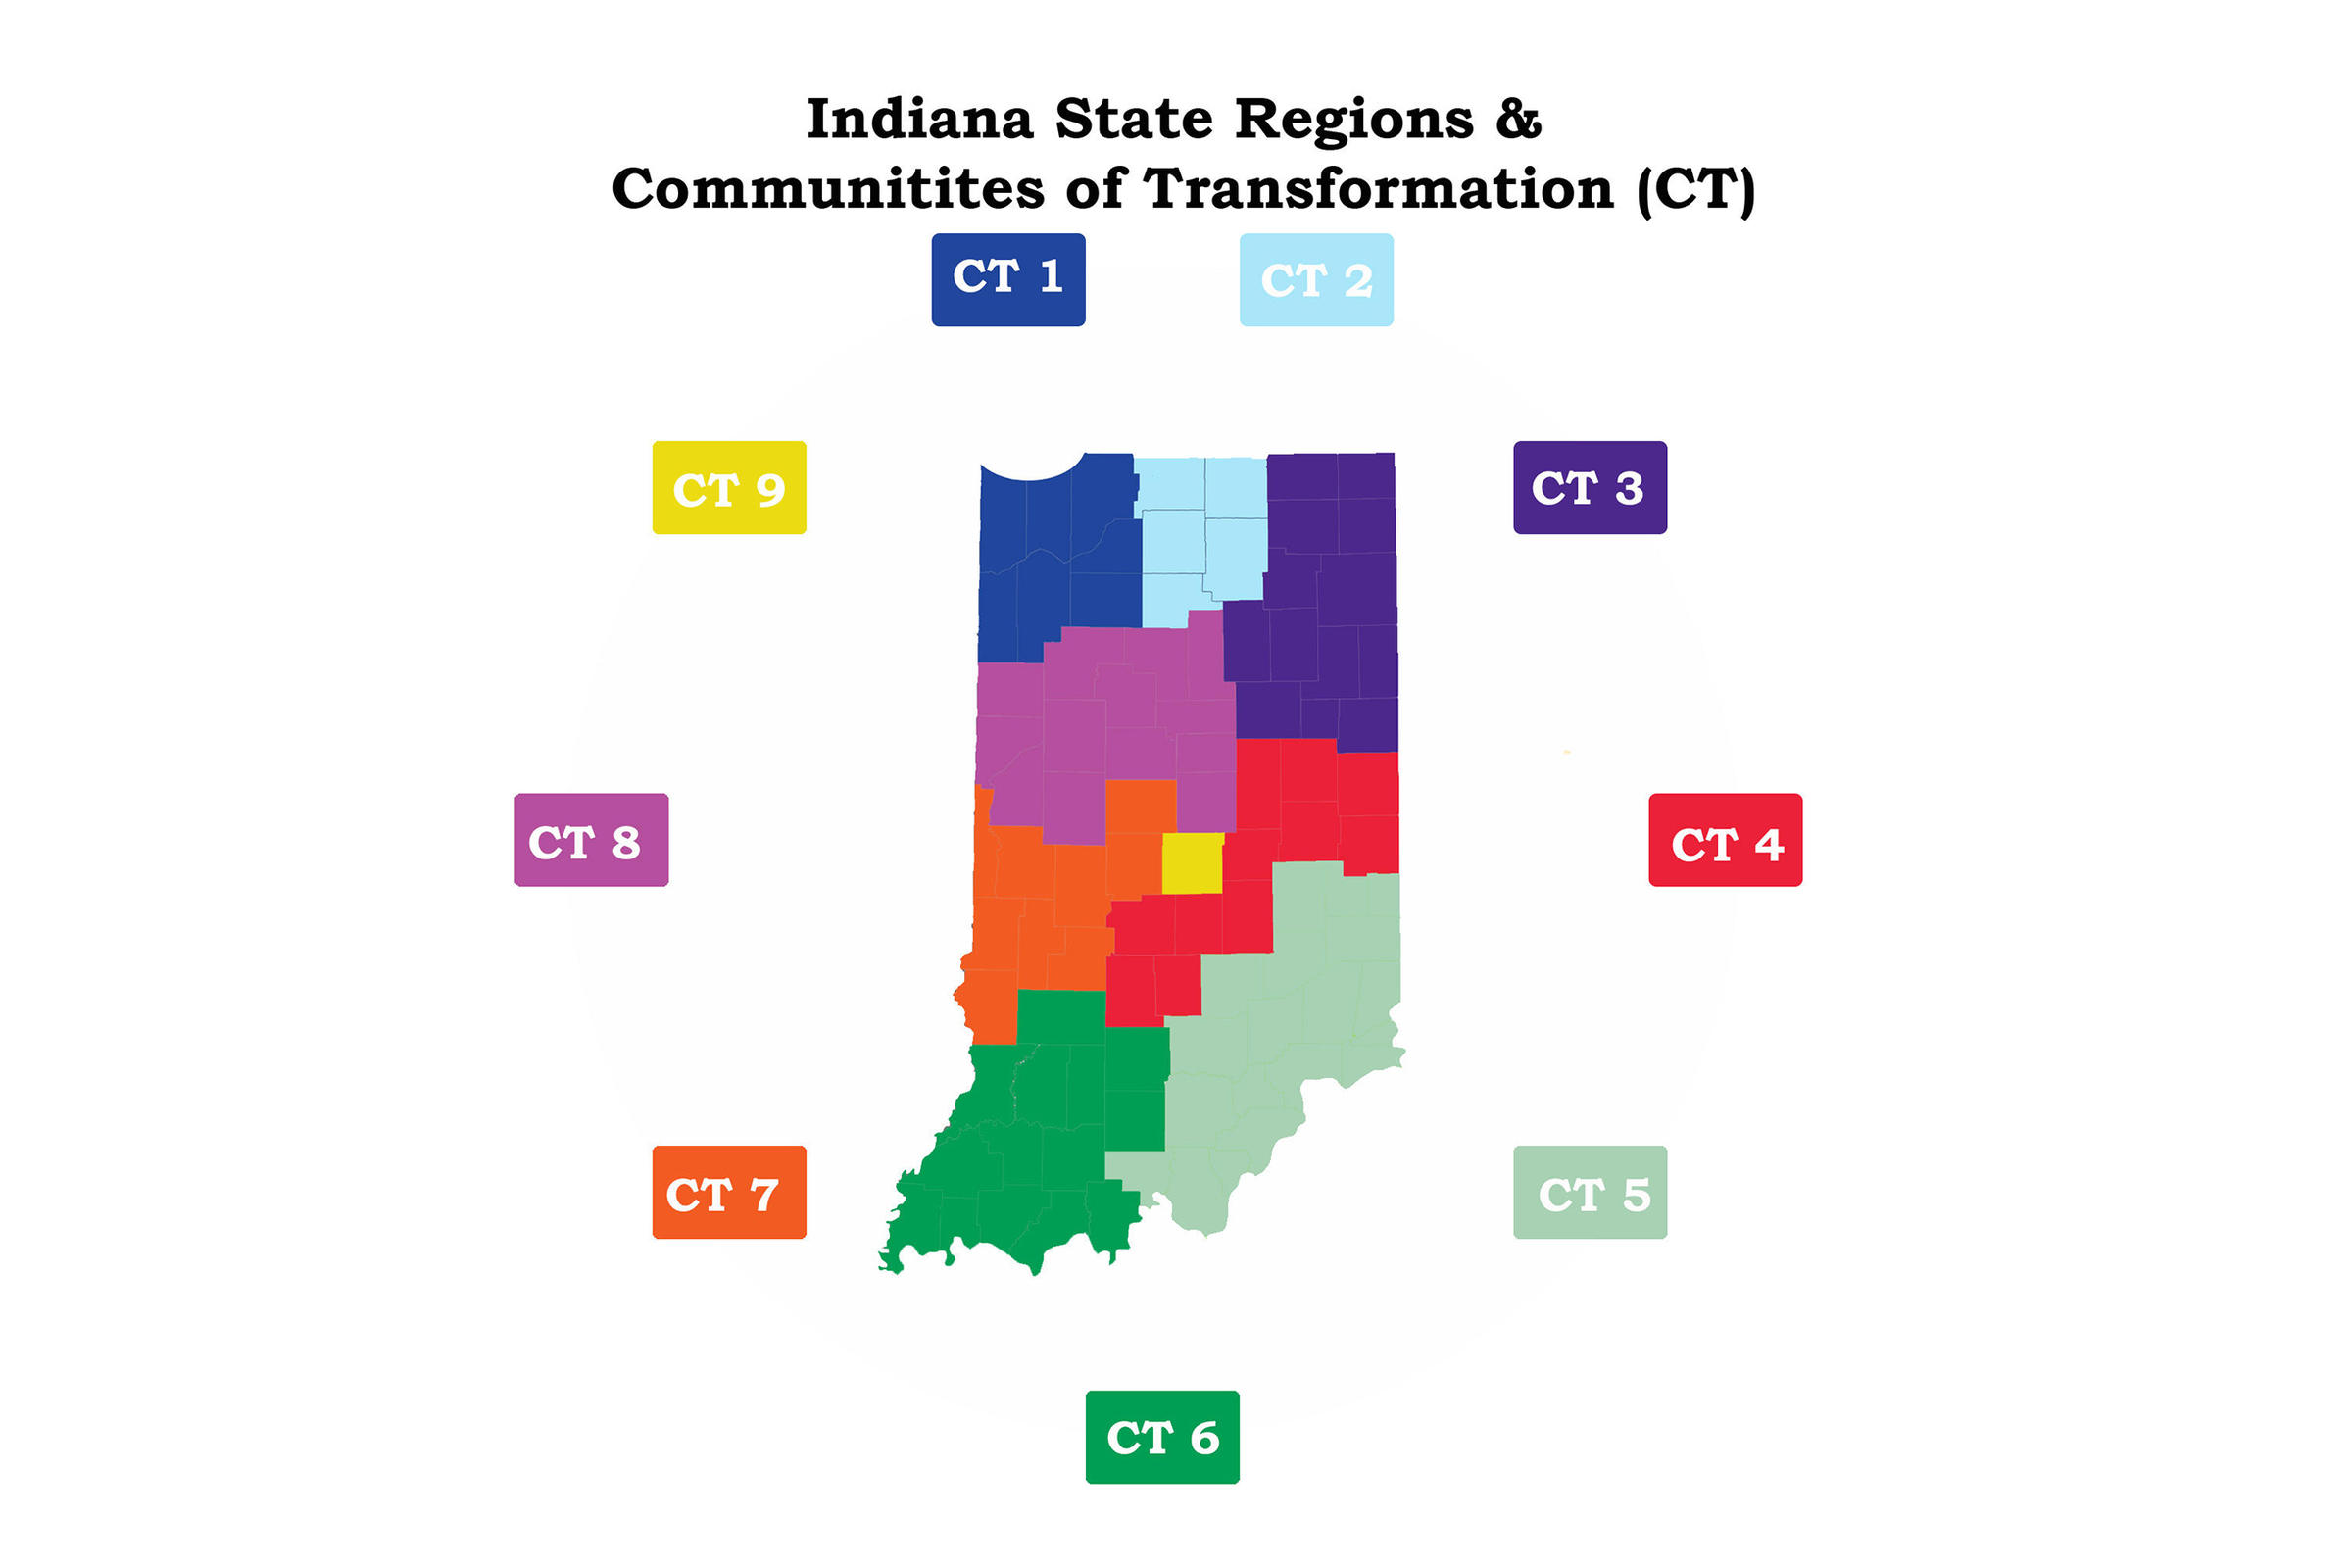 Indiana state regions and communities of transformation